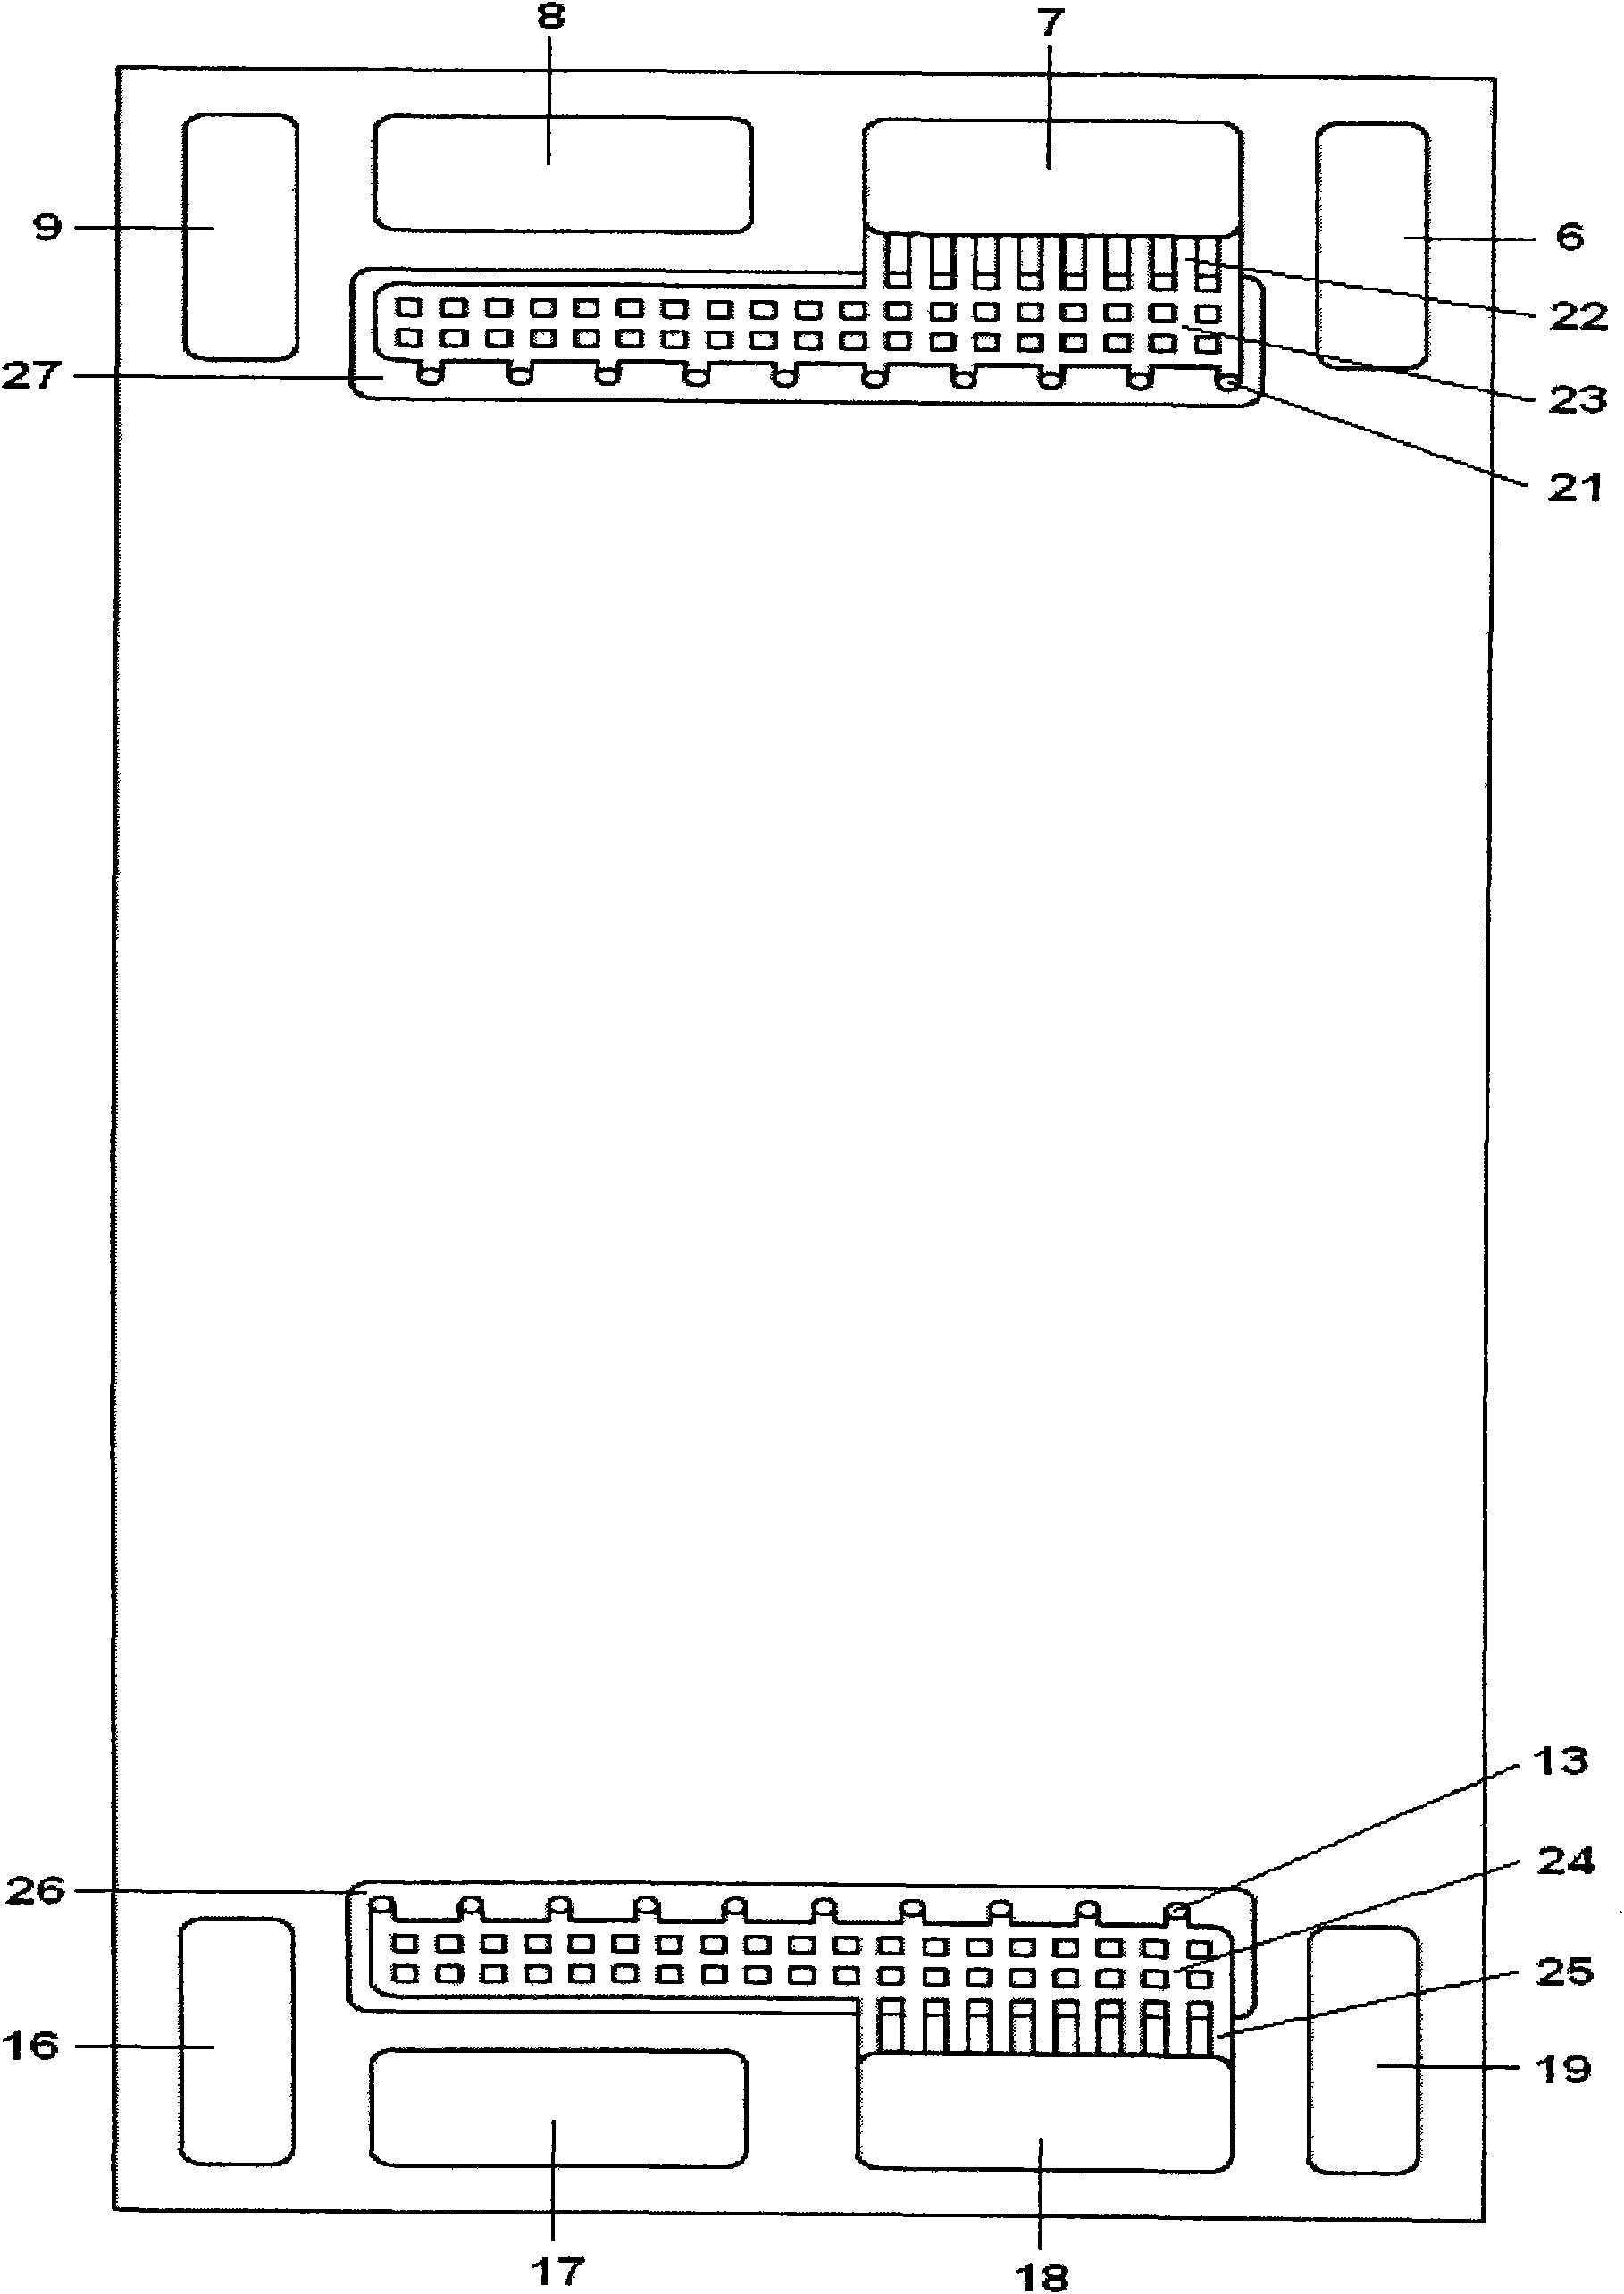 Fuel cell based on in-plate counter-flow flow field